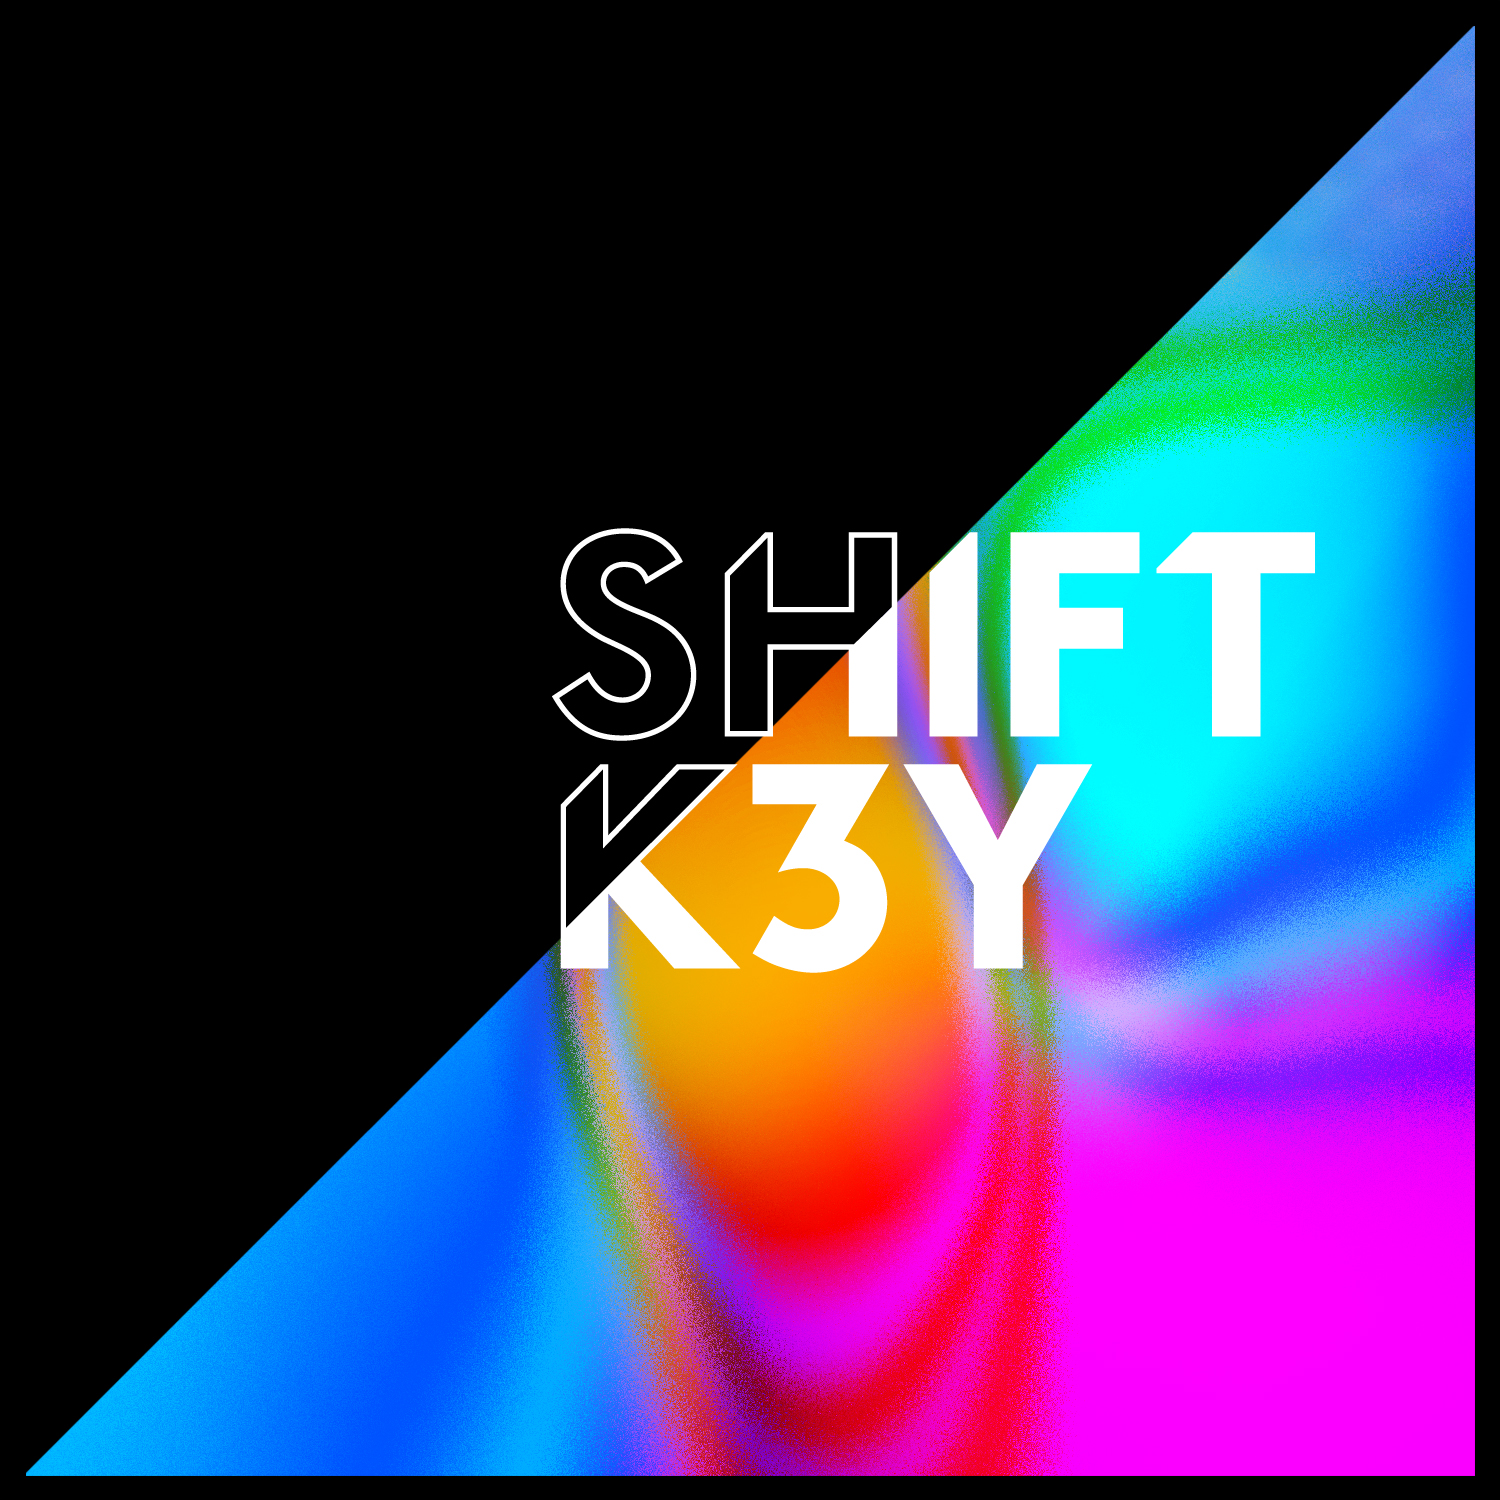 Shift K3y – Touch